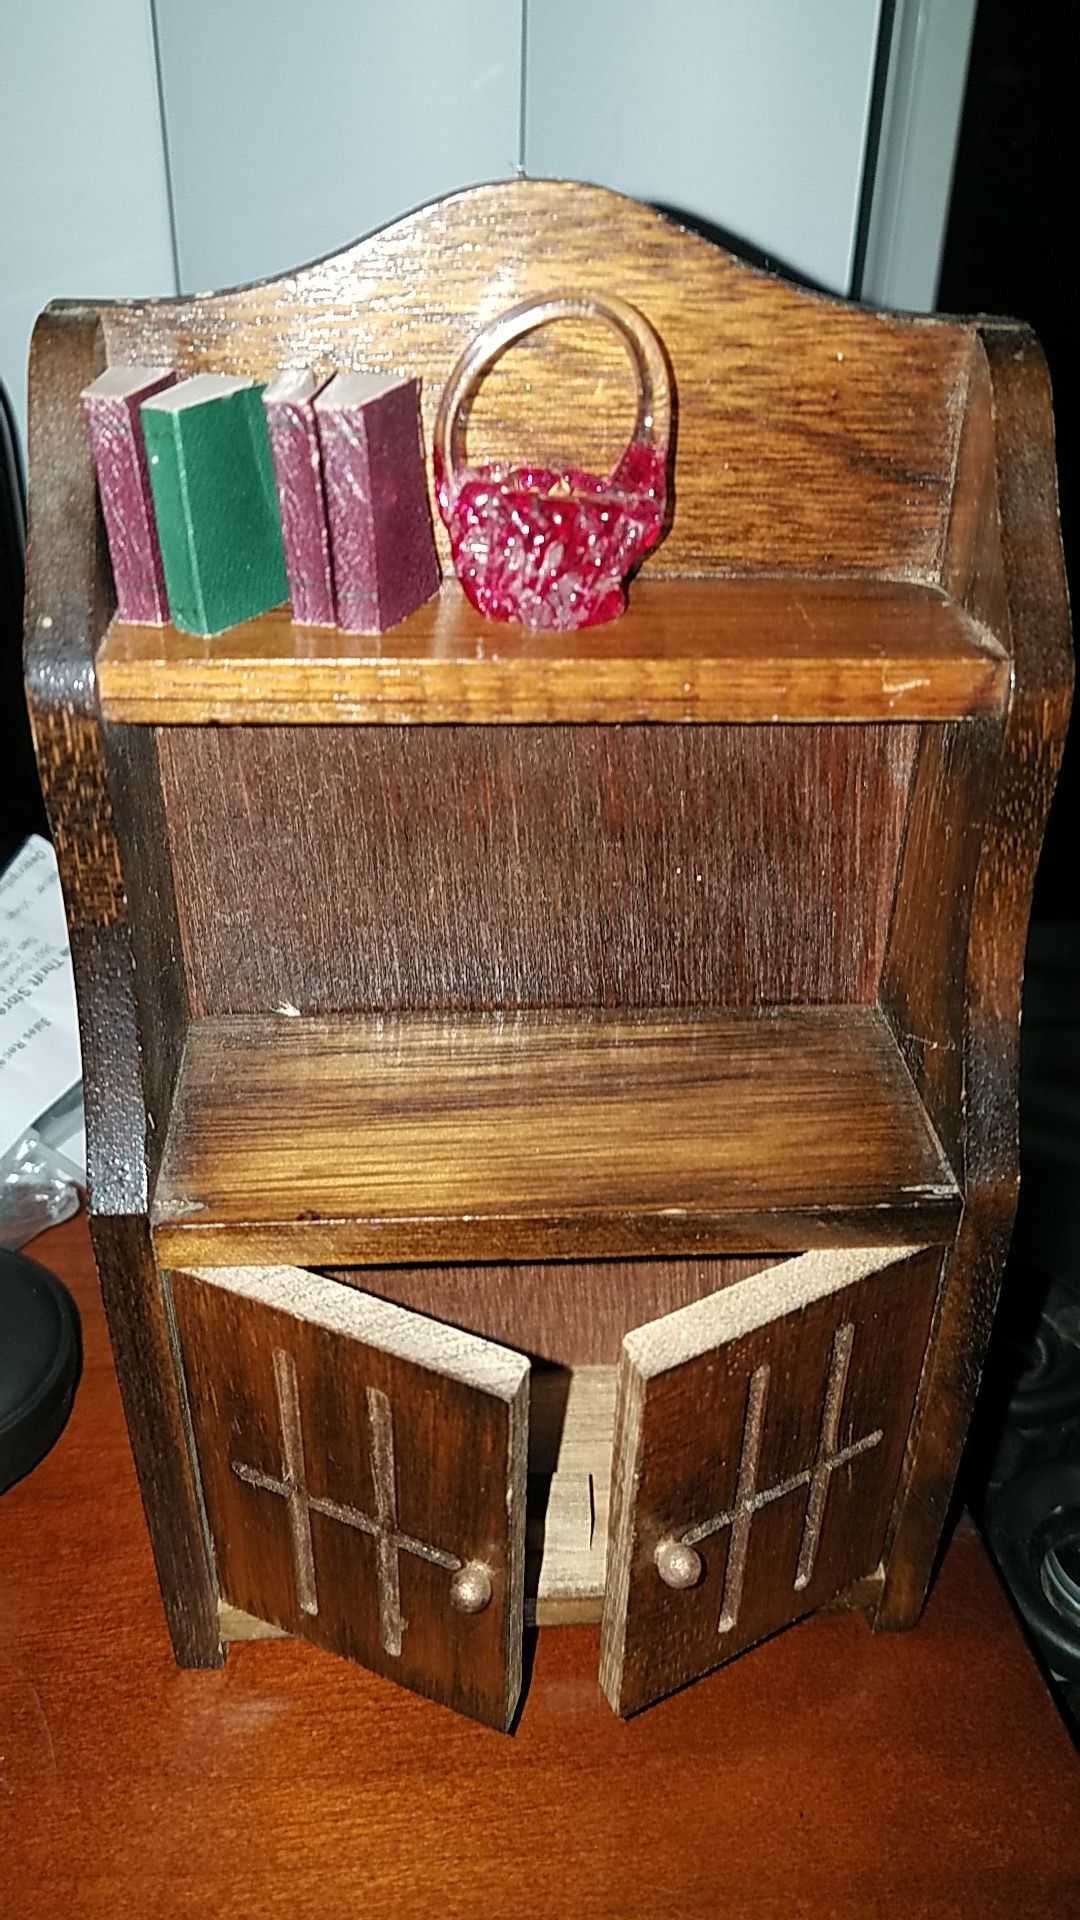 1:12 scale antique doll house hutch with books and glass flower basket $10